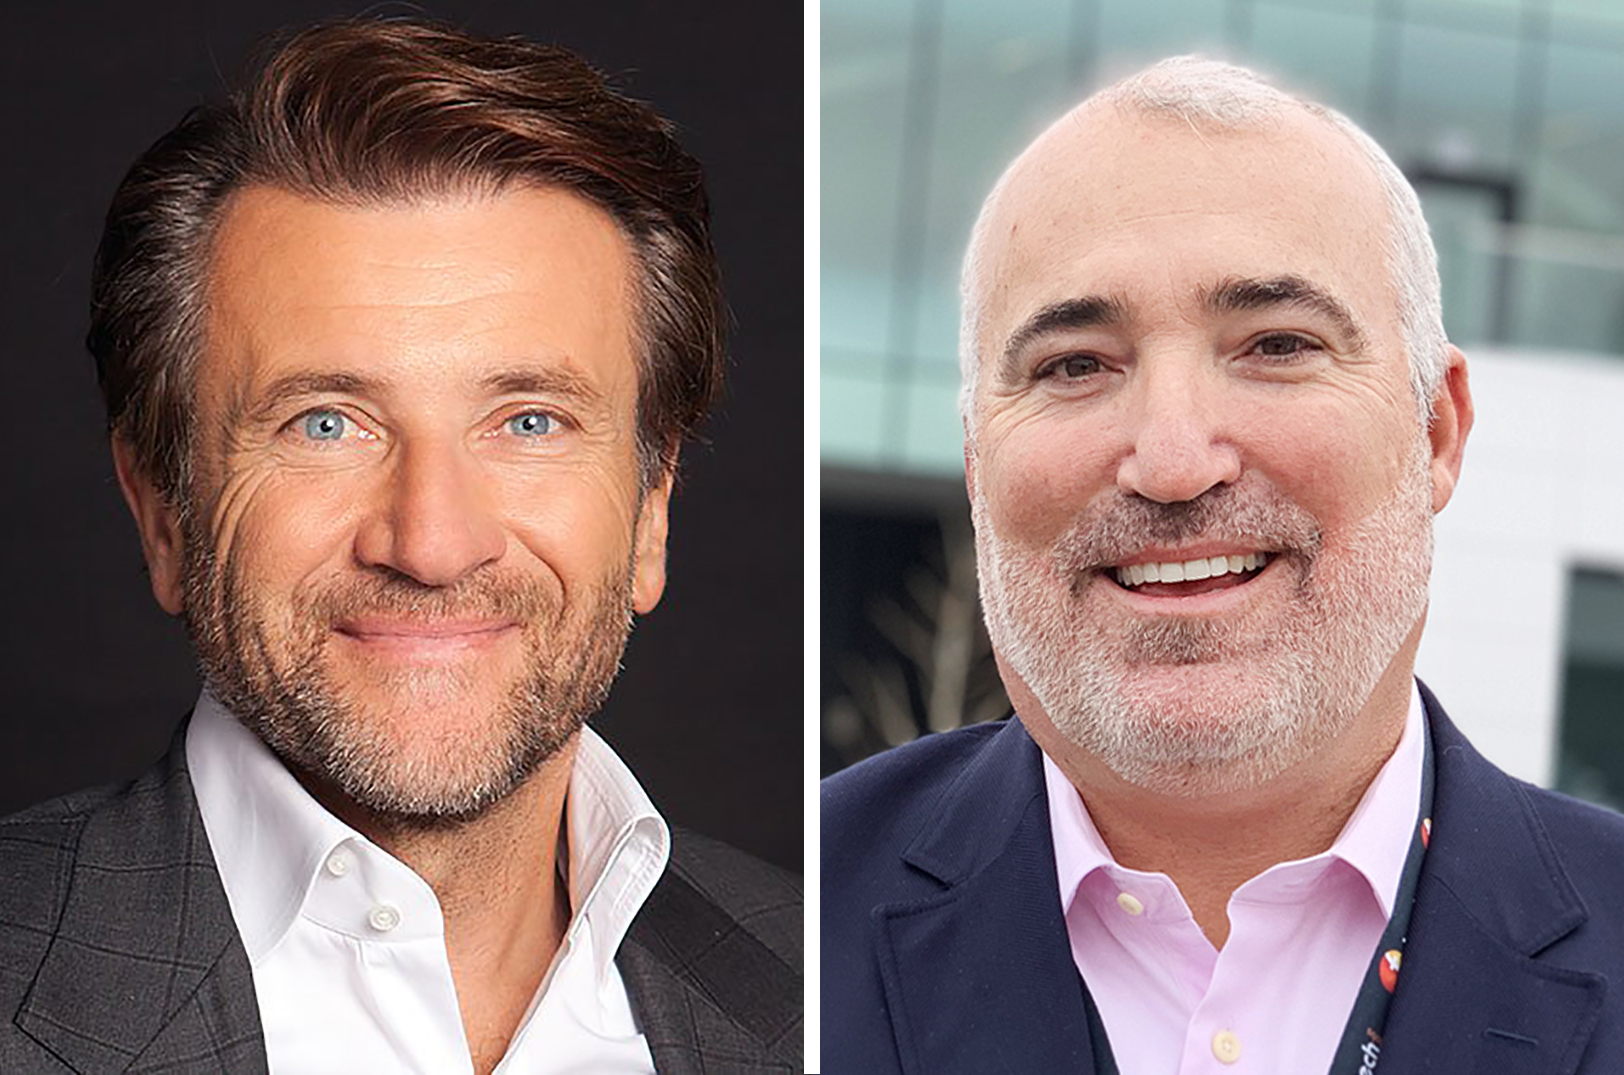 Merger alert: ‘Shark Tank’ star teams with Gary Fish, Fishtech to form new cybersecurity powerhouse